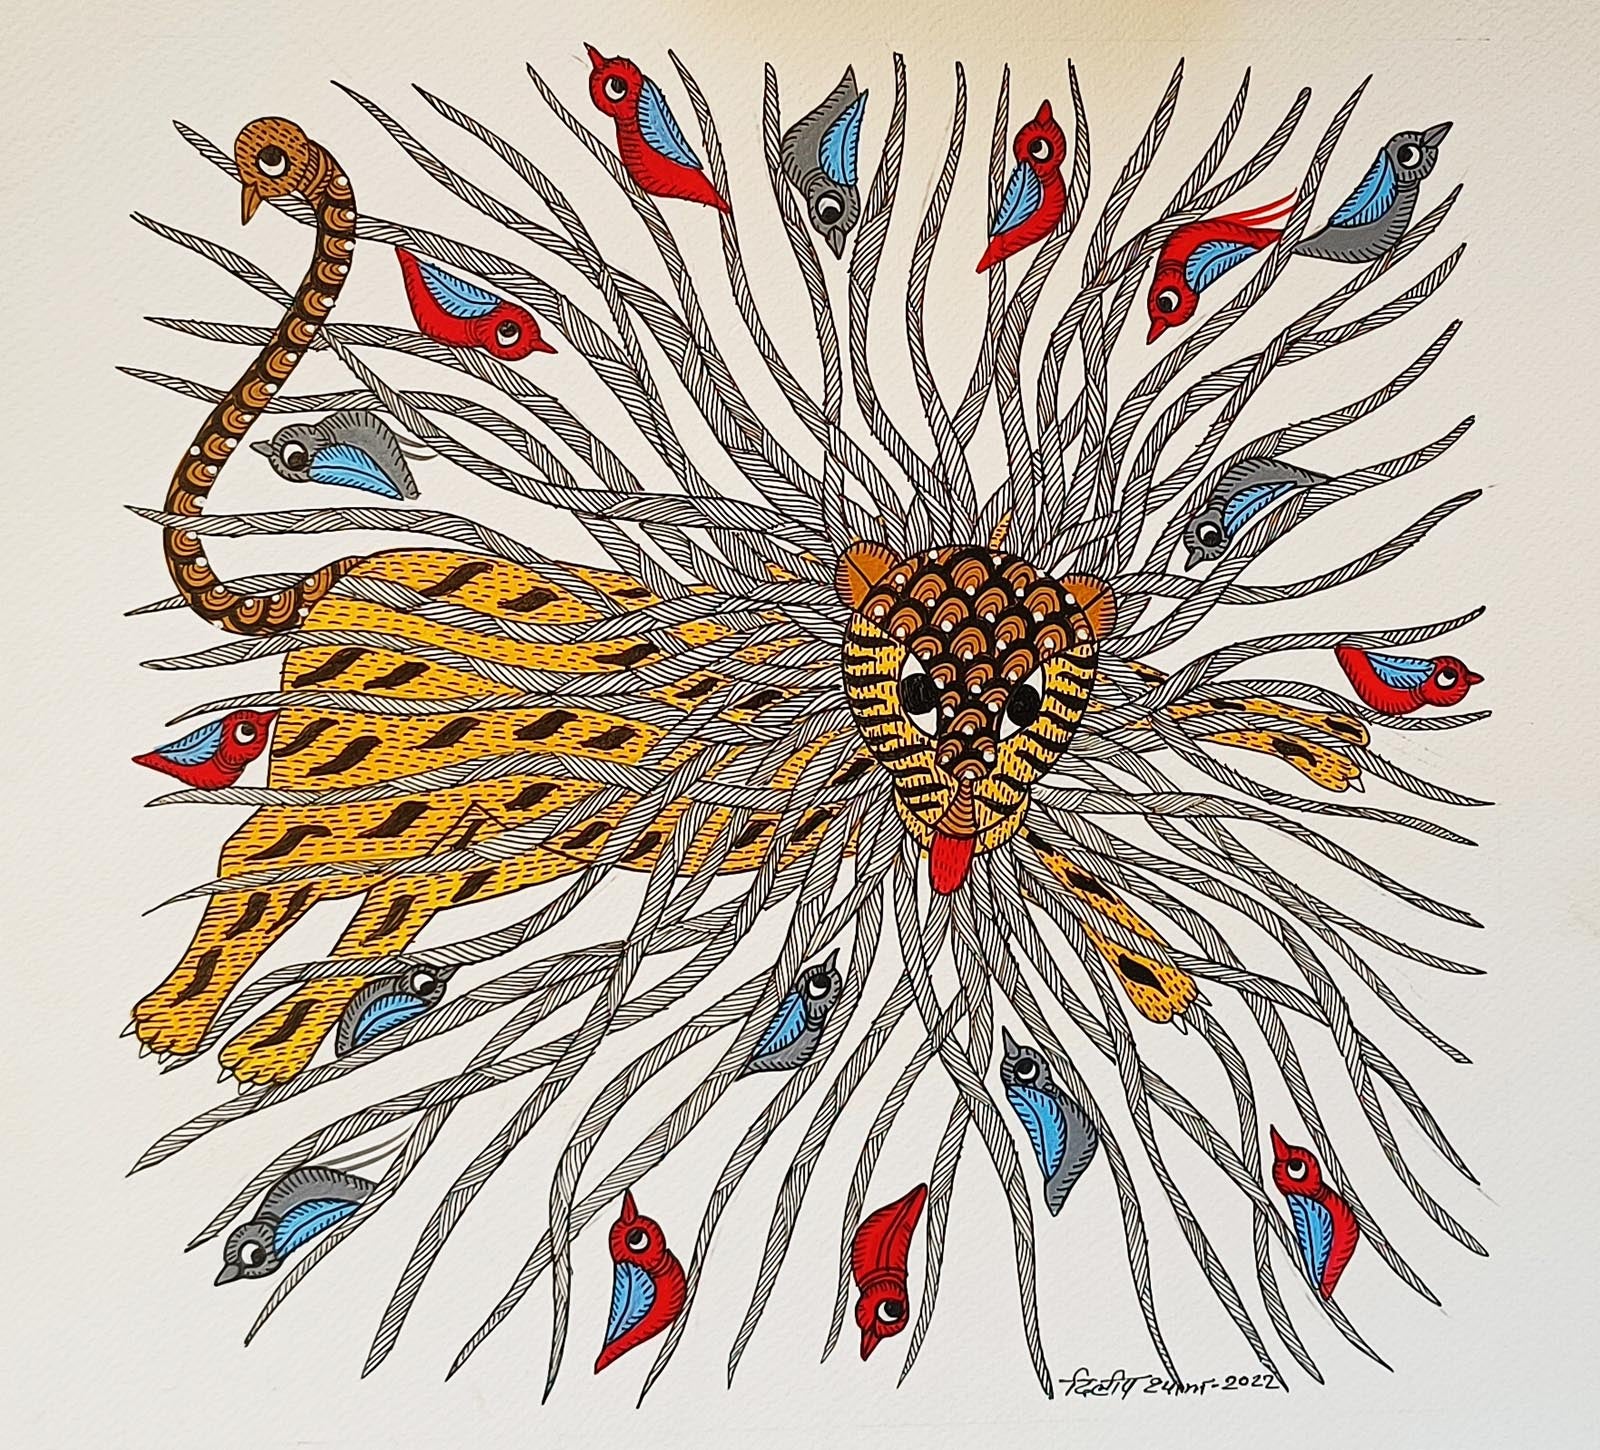 The King of the Wild By tribal Gond artist, Dilip Shyam